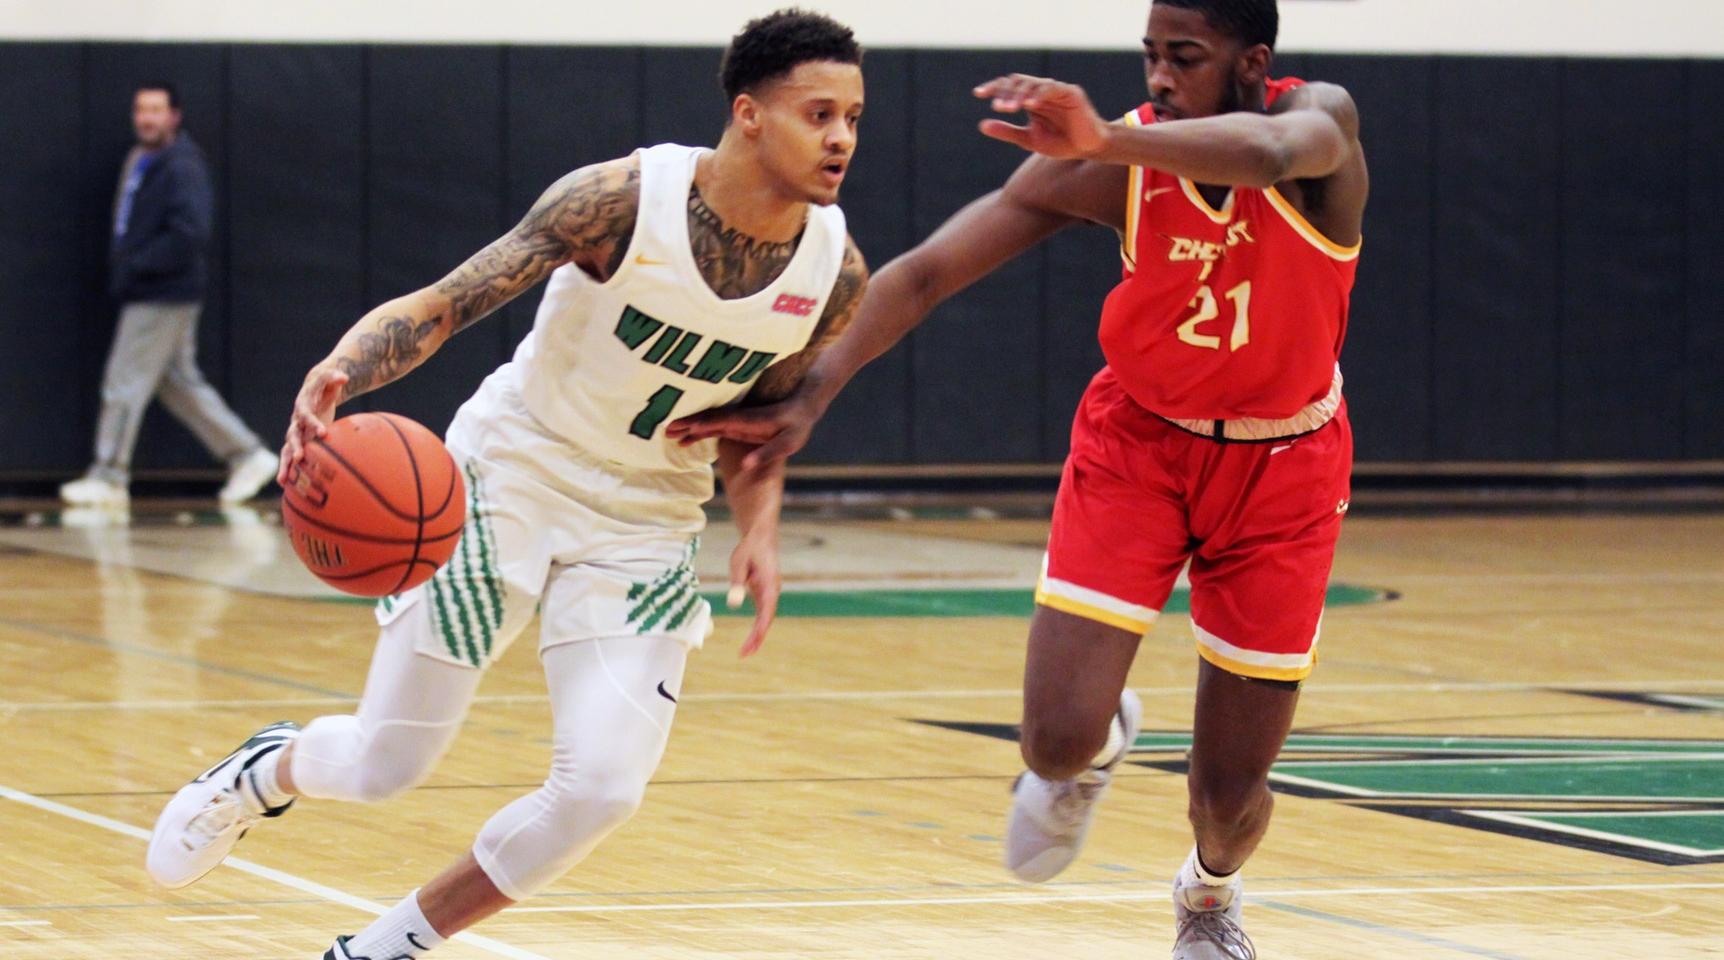 Copyright 2019; Wilmington University. All rights reserved. File photo of Jermaine Head who led the Wildcats with 28 points at Jefferson. Photo by Dan Lauletta. January 22, 2019 vs. Chestnut Hill.